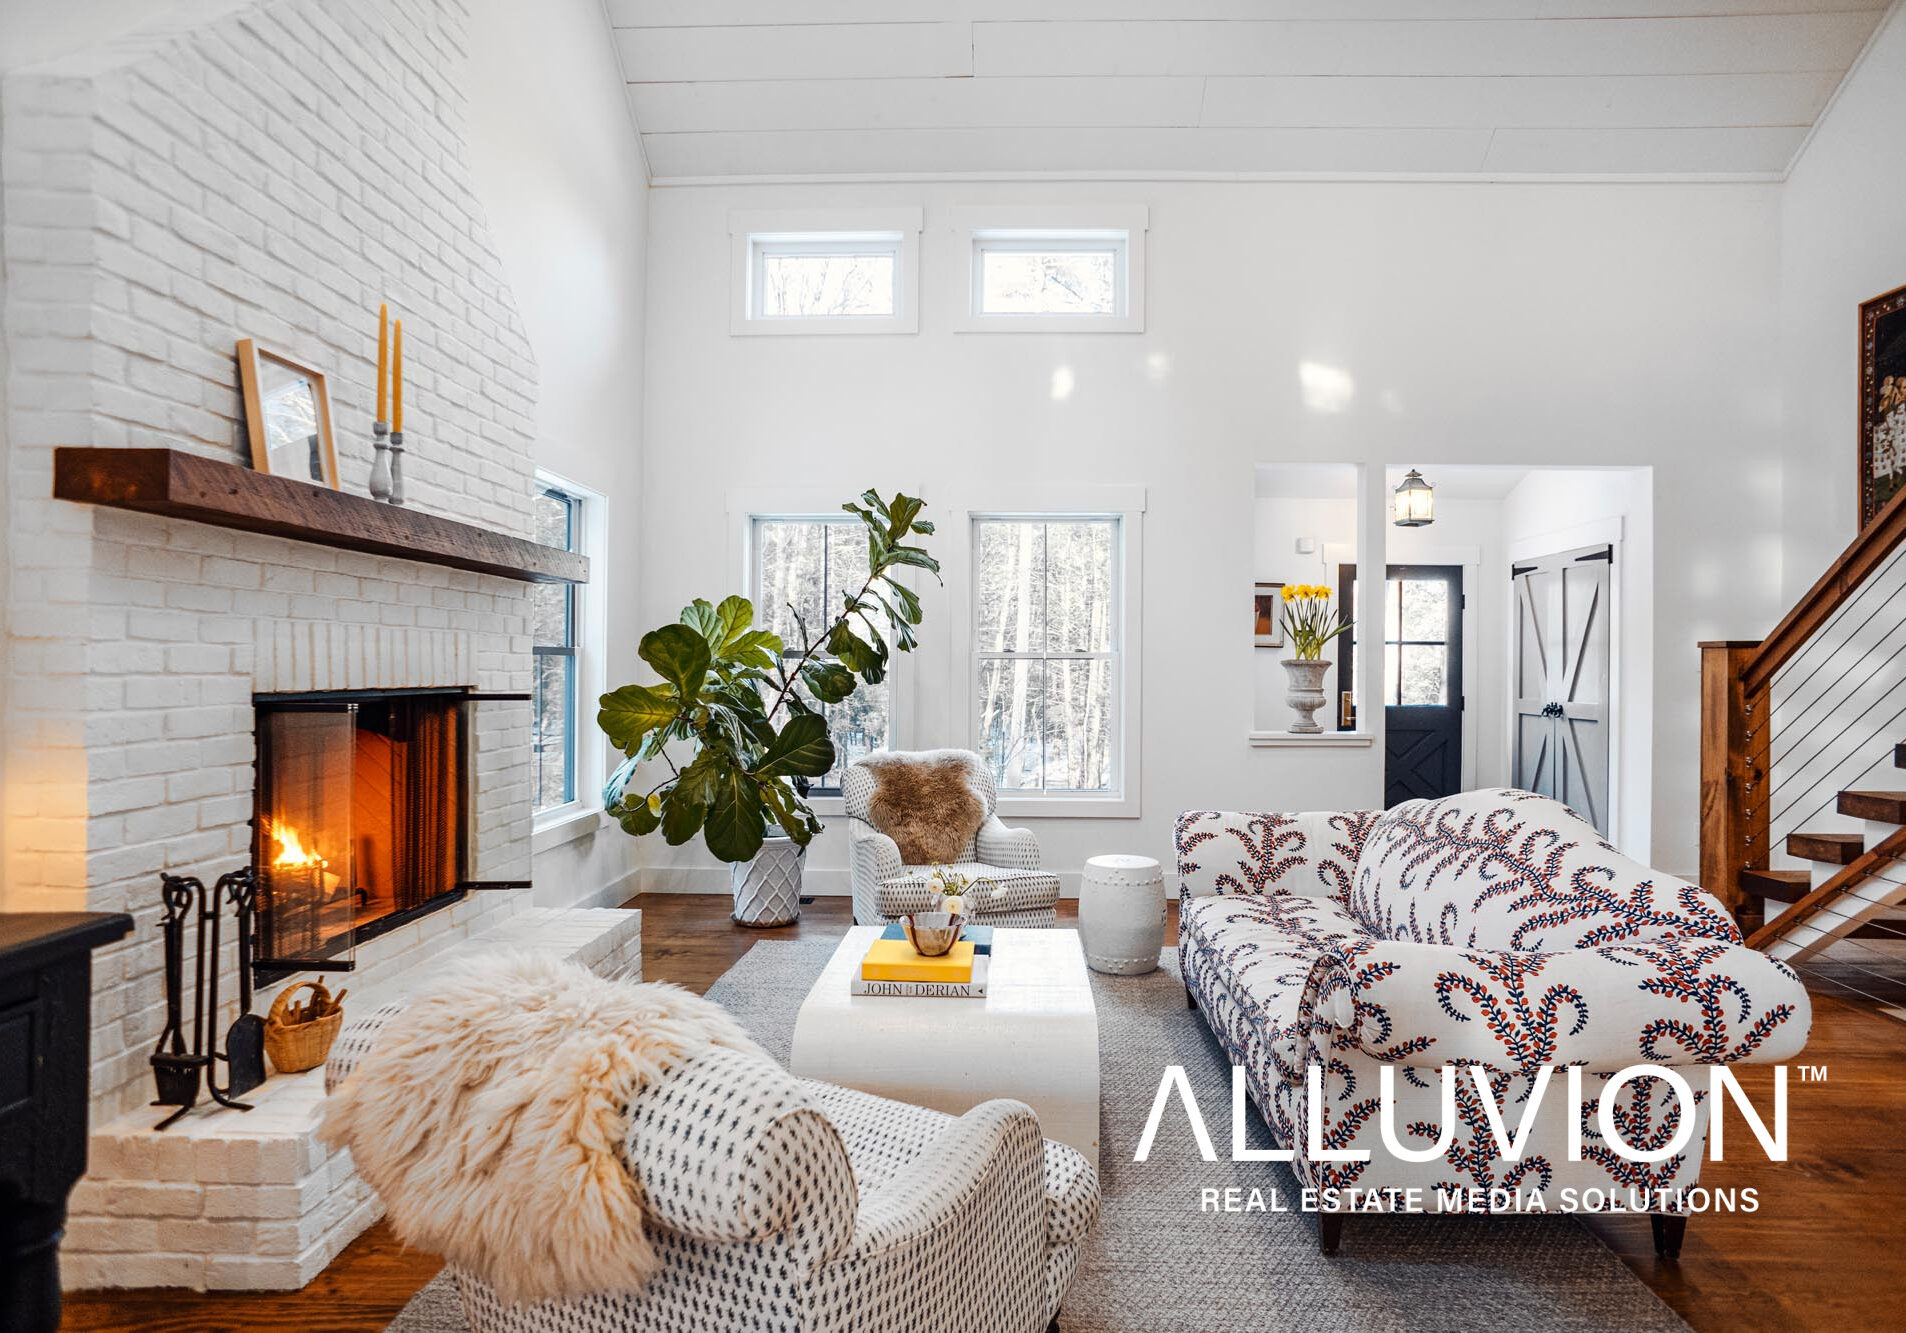 Modern Farmhouse in Catskill Mountains – Airbnb / Real Estate Photography by Maxwell Alexander